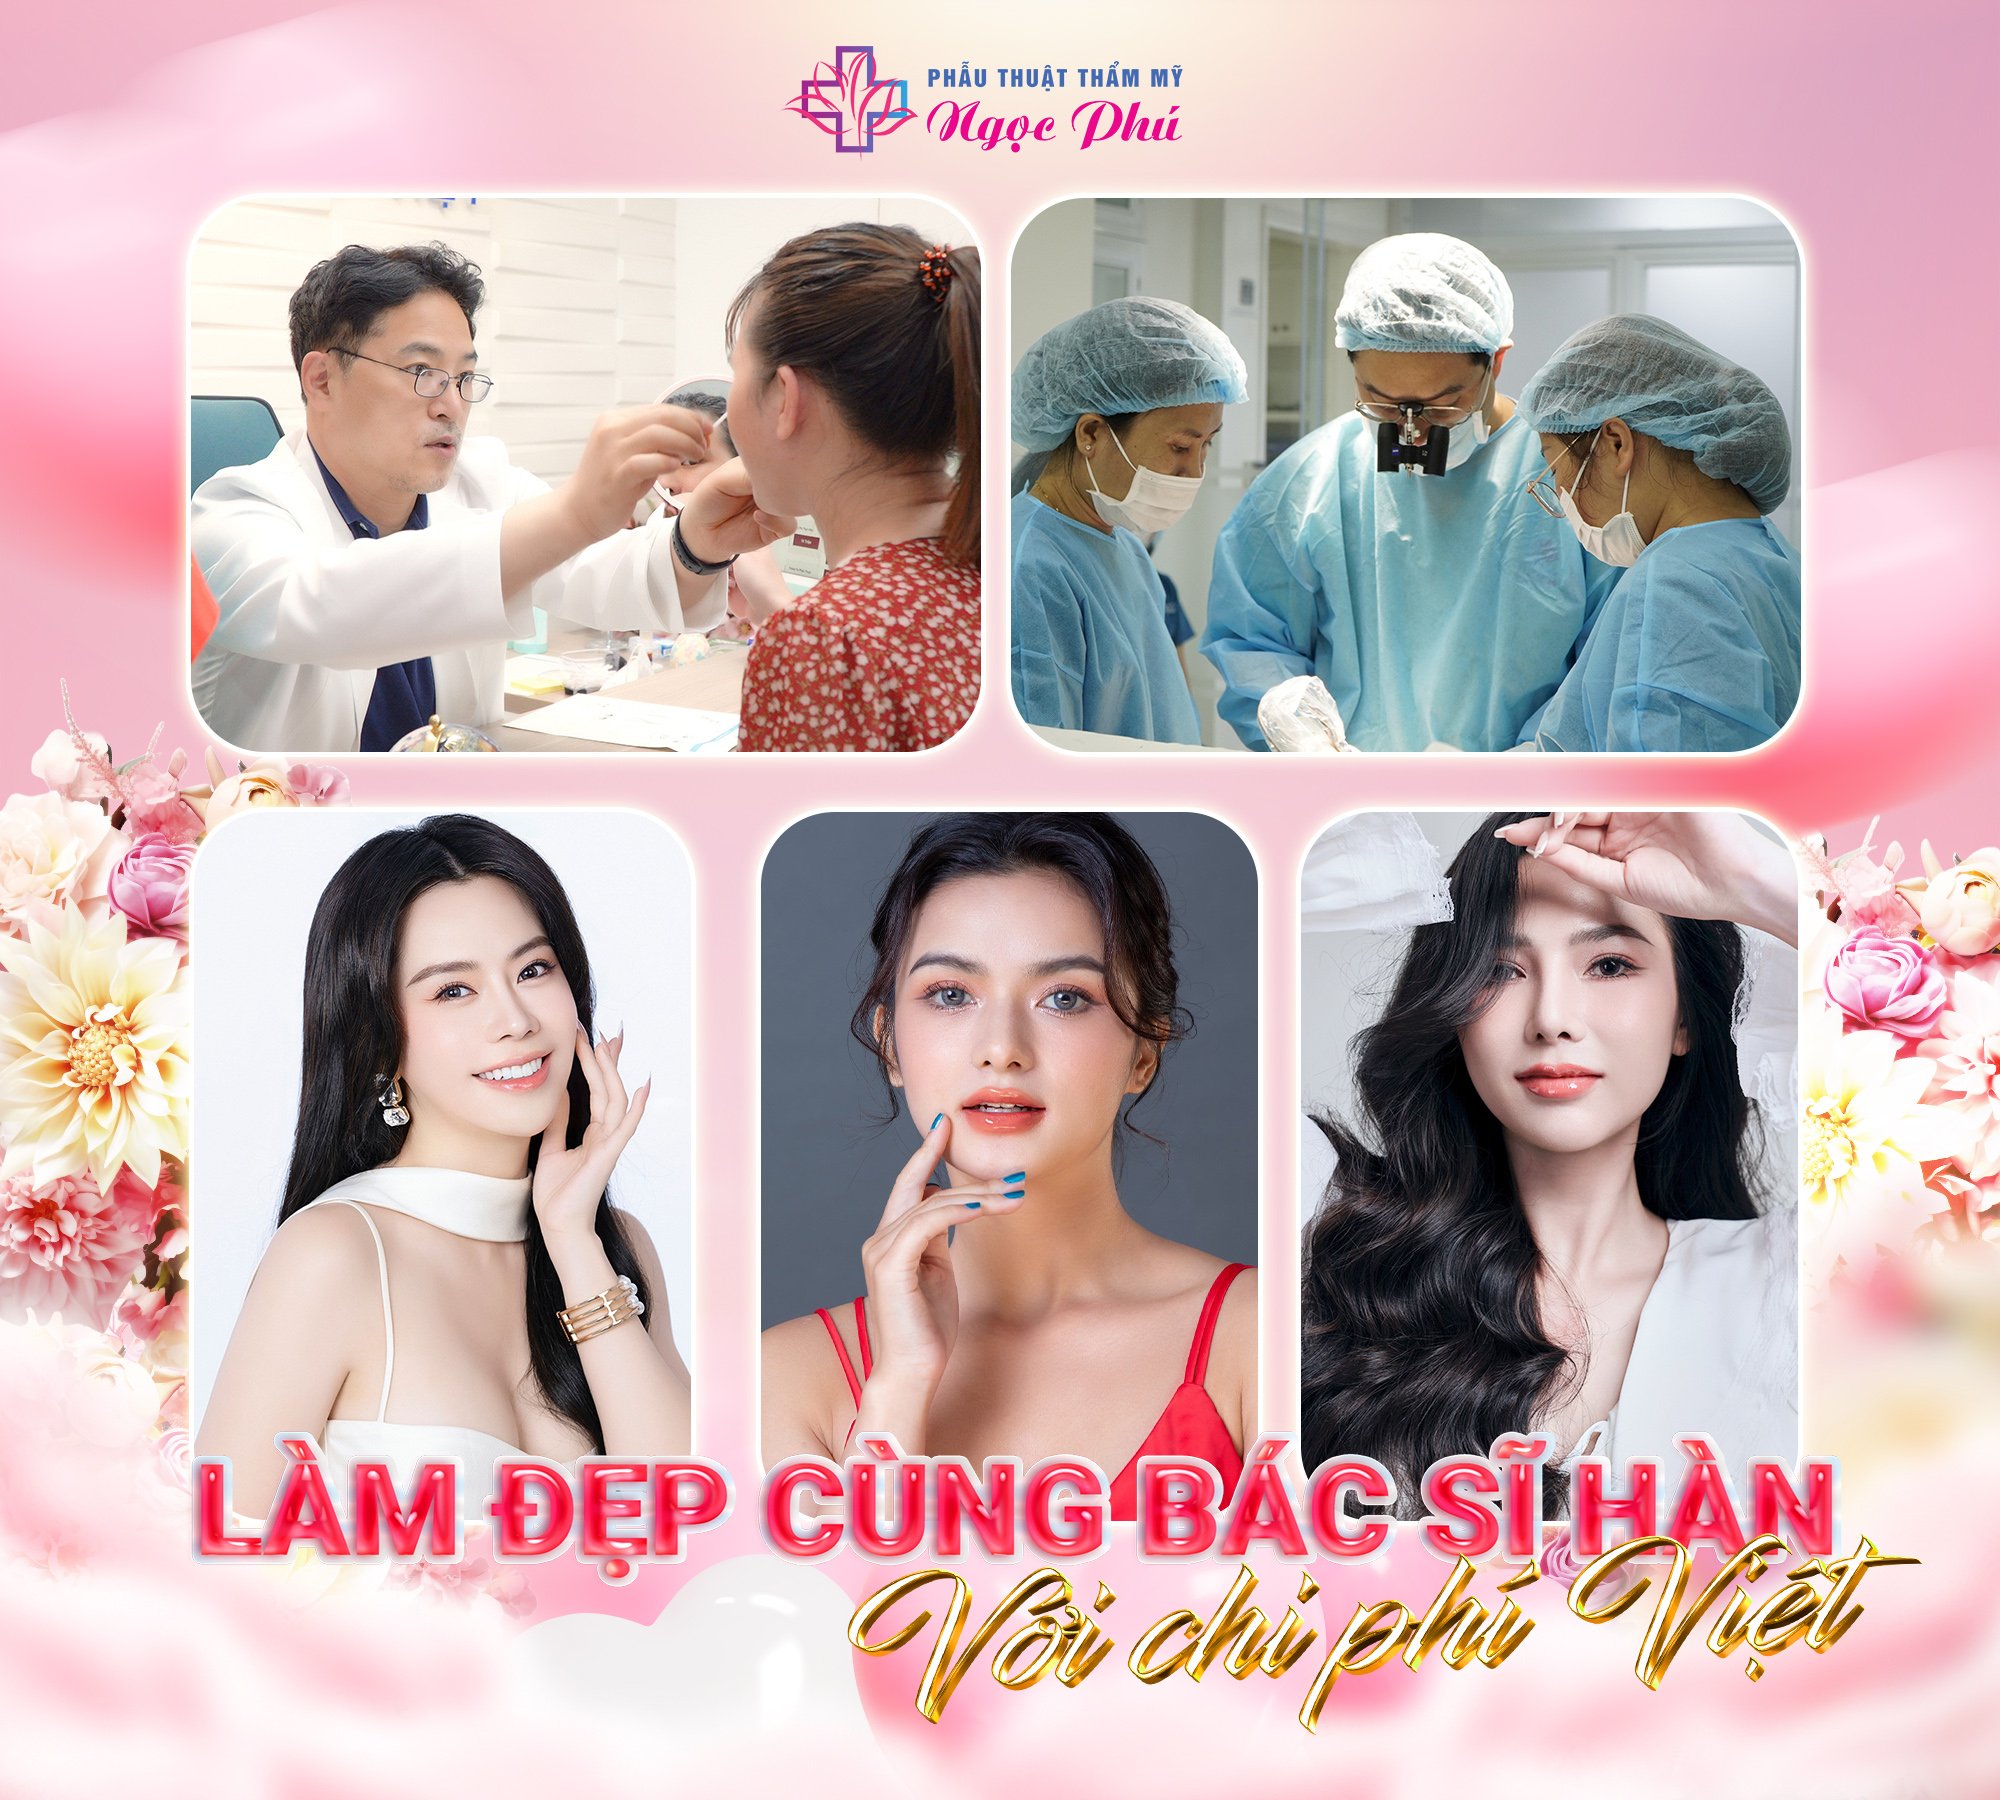 The first Korean doctor licensed to perform plastic surgery in HCMC.